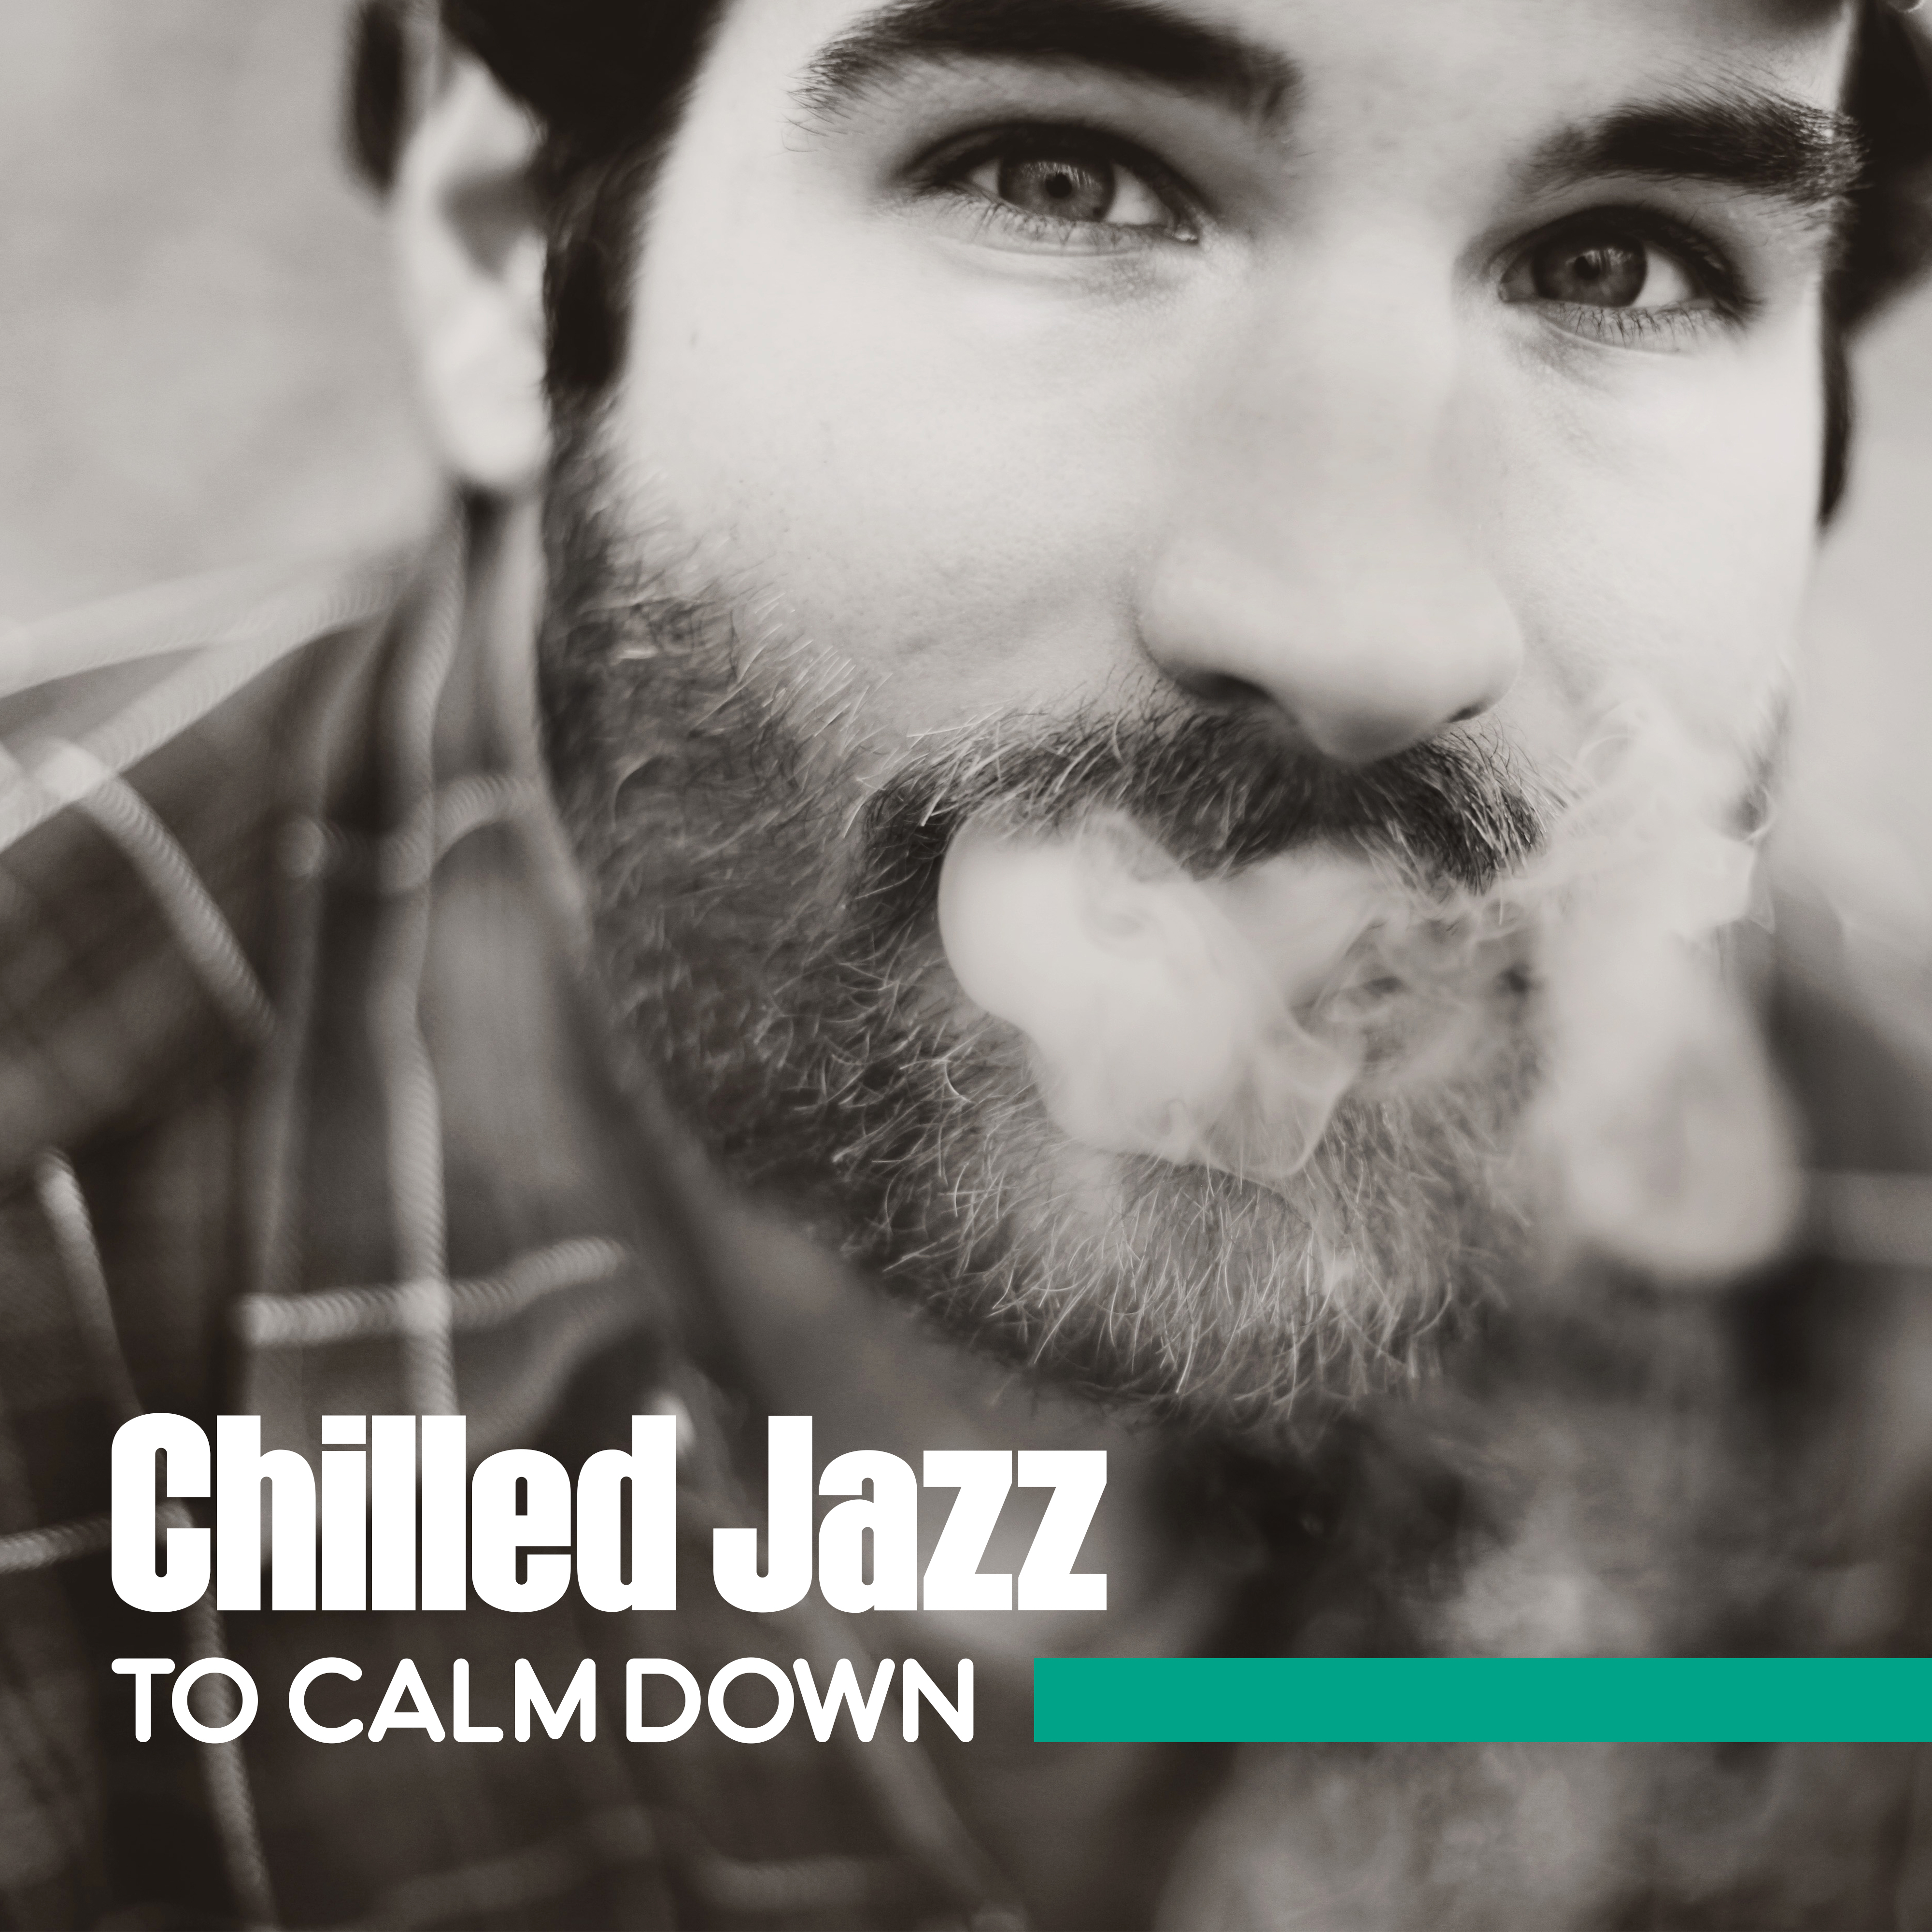 Chilled Jazz to Calm Down – Smooth Sounds to Relax, Rest with Jazz, Moonlight Piano, Evening Relaxation